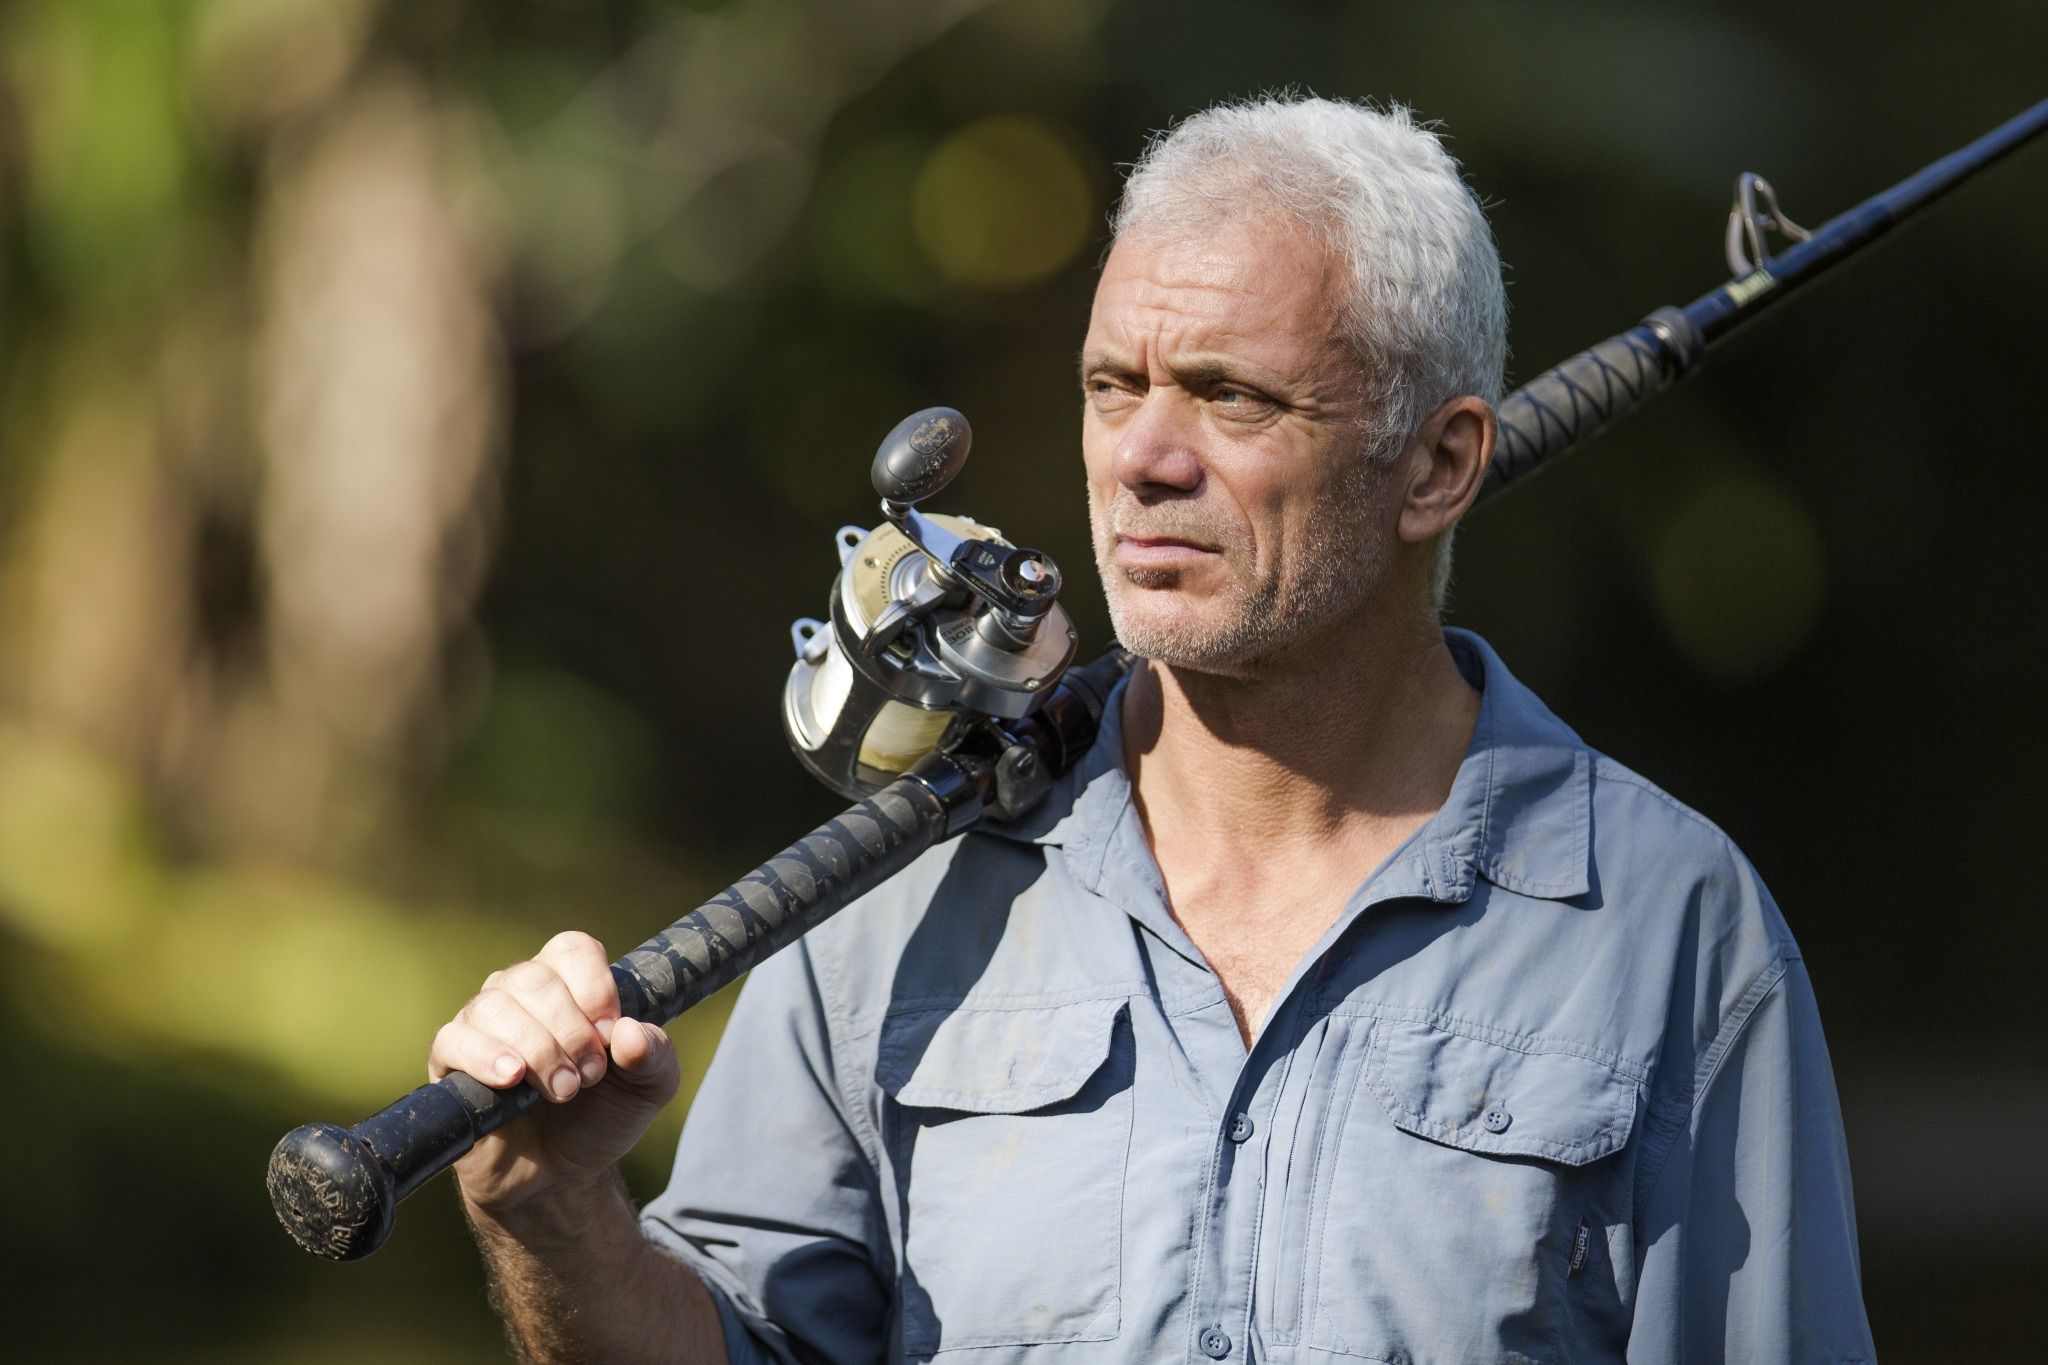 Jeremy Wade from River Monsters with a fishing pole